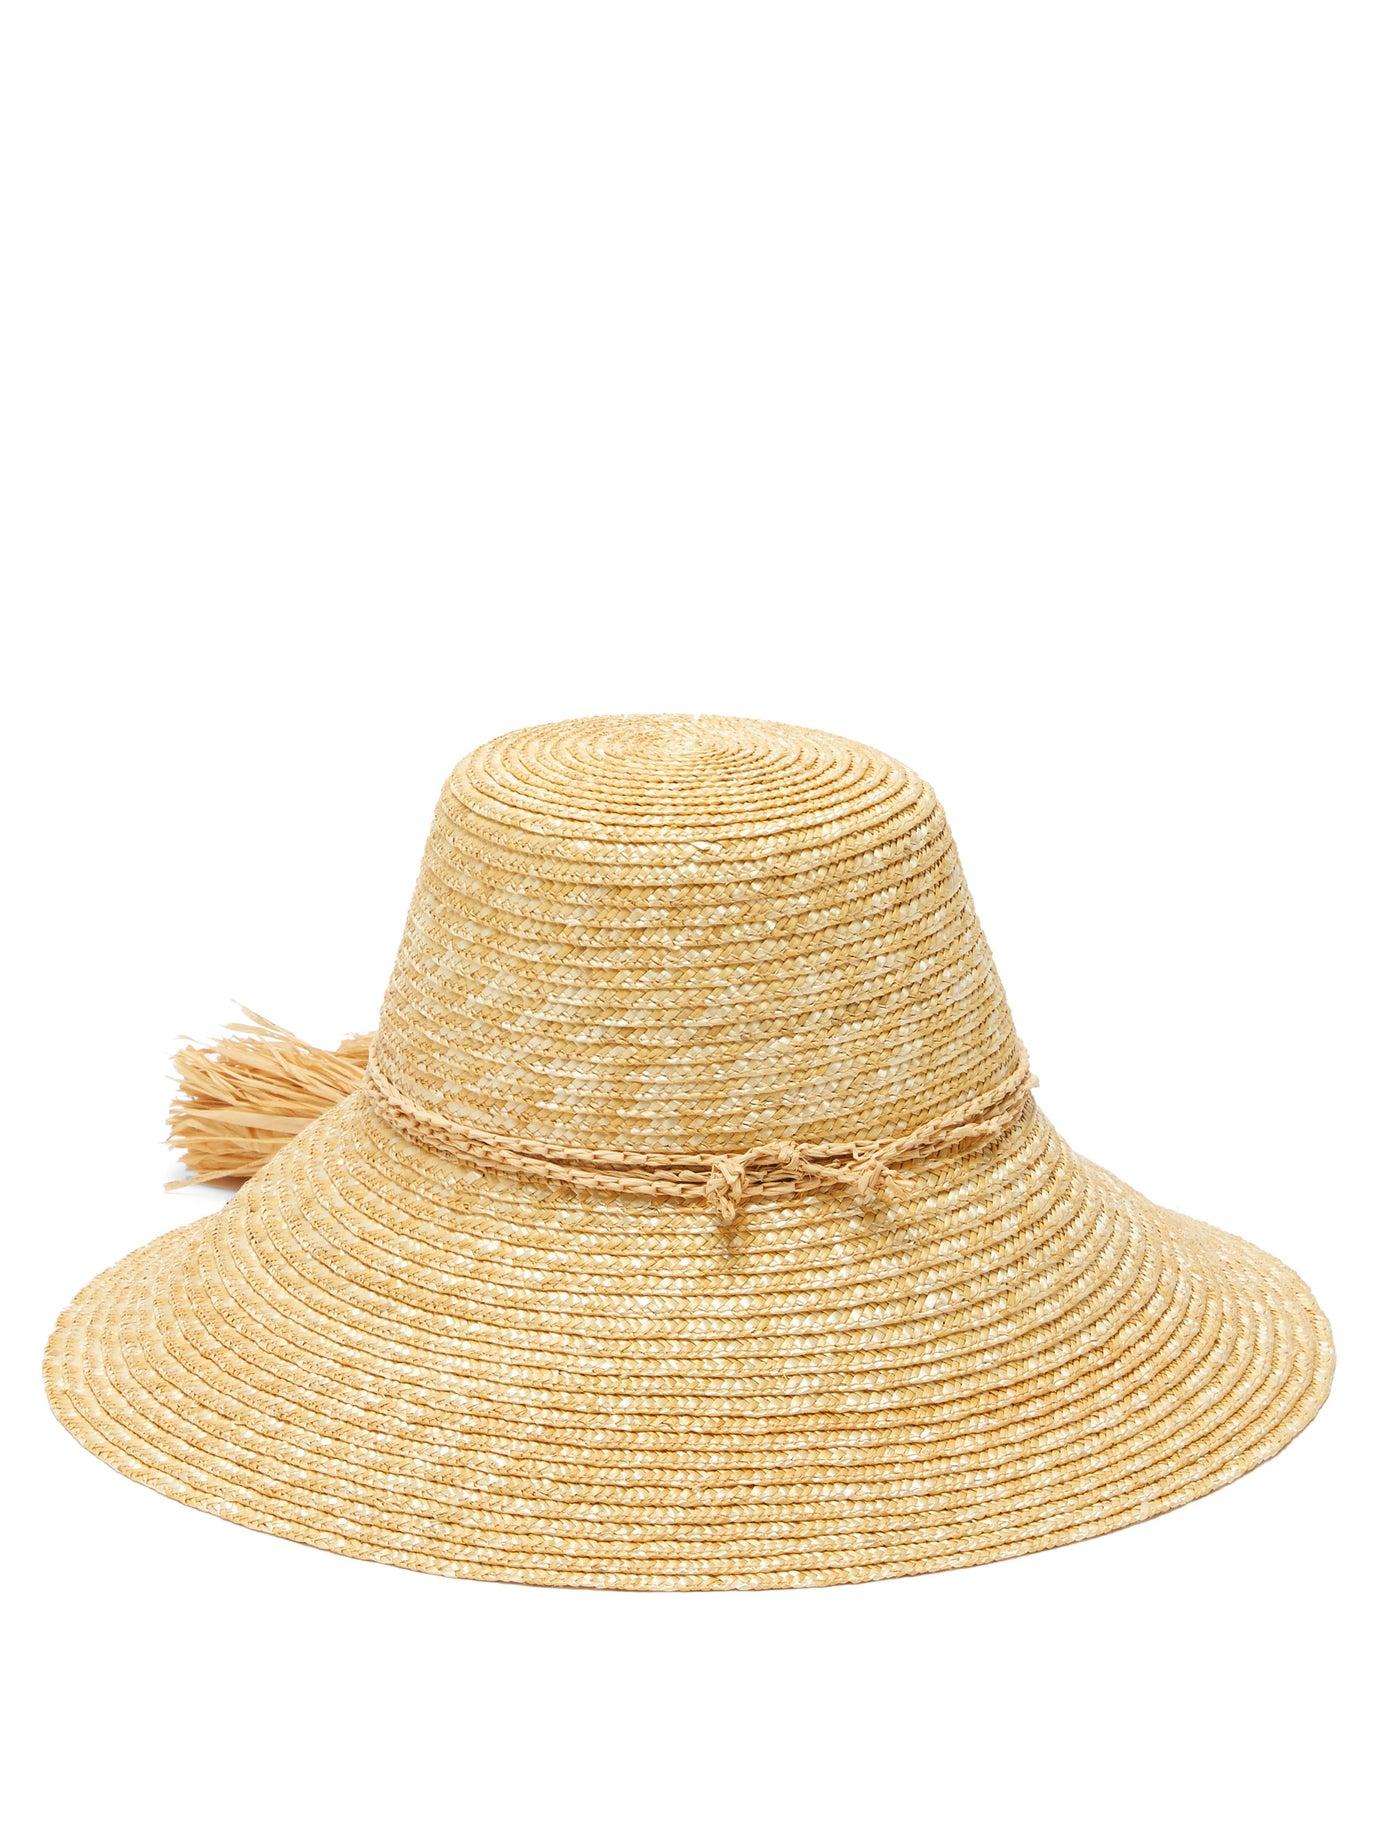 Lola Hats Re-rope Conical Straw Hat in Beige (Natural) - Lyst